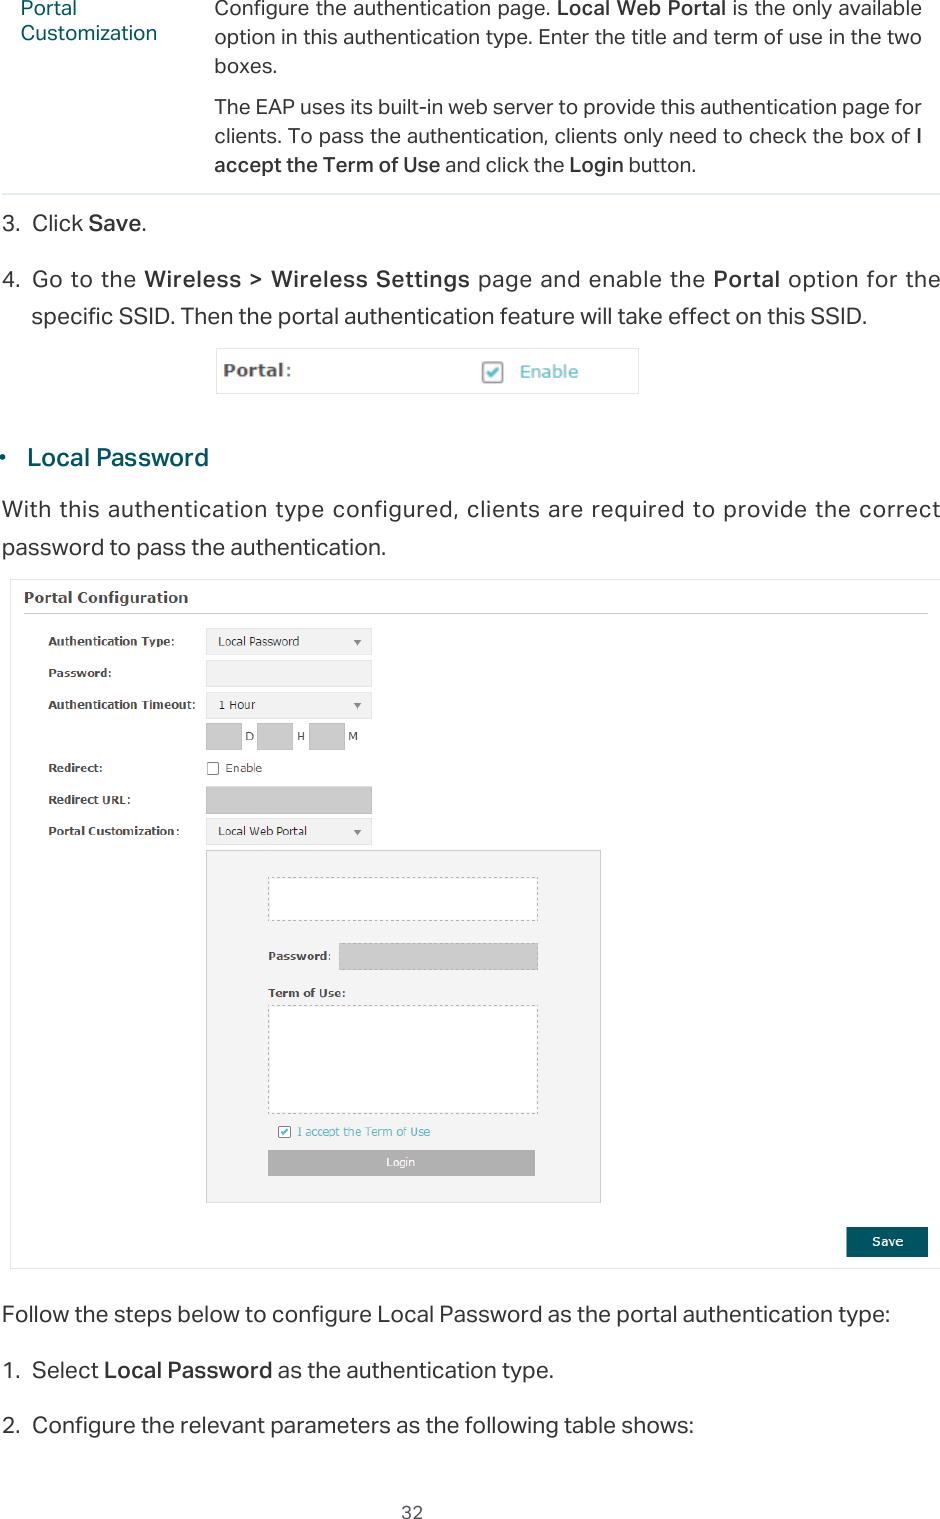  32Portal CustomizationConfigure the authentication page. Local Web Portal is the only available option in this authentication type. Enter the title and term of use in the two boxes.The EAP uses its built-in web server to provide this authentication page for clients. To pass the authentication, clients only need to check the box of I accept the Term of Use and click the Login button.3. Click Save.4. Go to the Wireless &gt; Wireless  Settings page and enable the Portal option for the specific SSID. Then the portal authentication feature will take effect on this SSID. ·Local PasswordWith this authentication type configured, clients are required to provide the correct password to pass the authentication.Follow the steps below to configure Local Password as the portal authentication type:1. Select Local Password as the authentication type.2. Configure the relevant parameters as the following table shows: